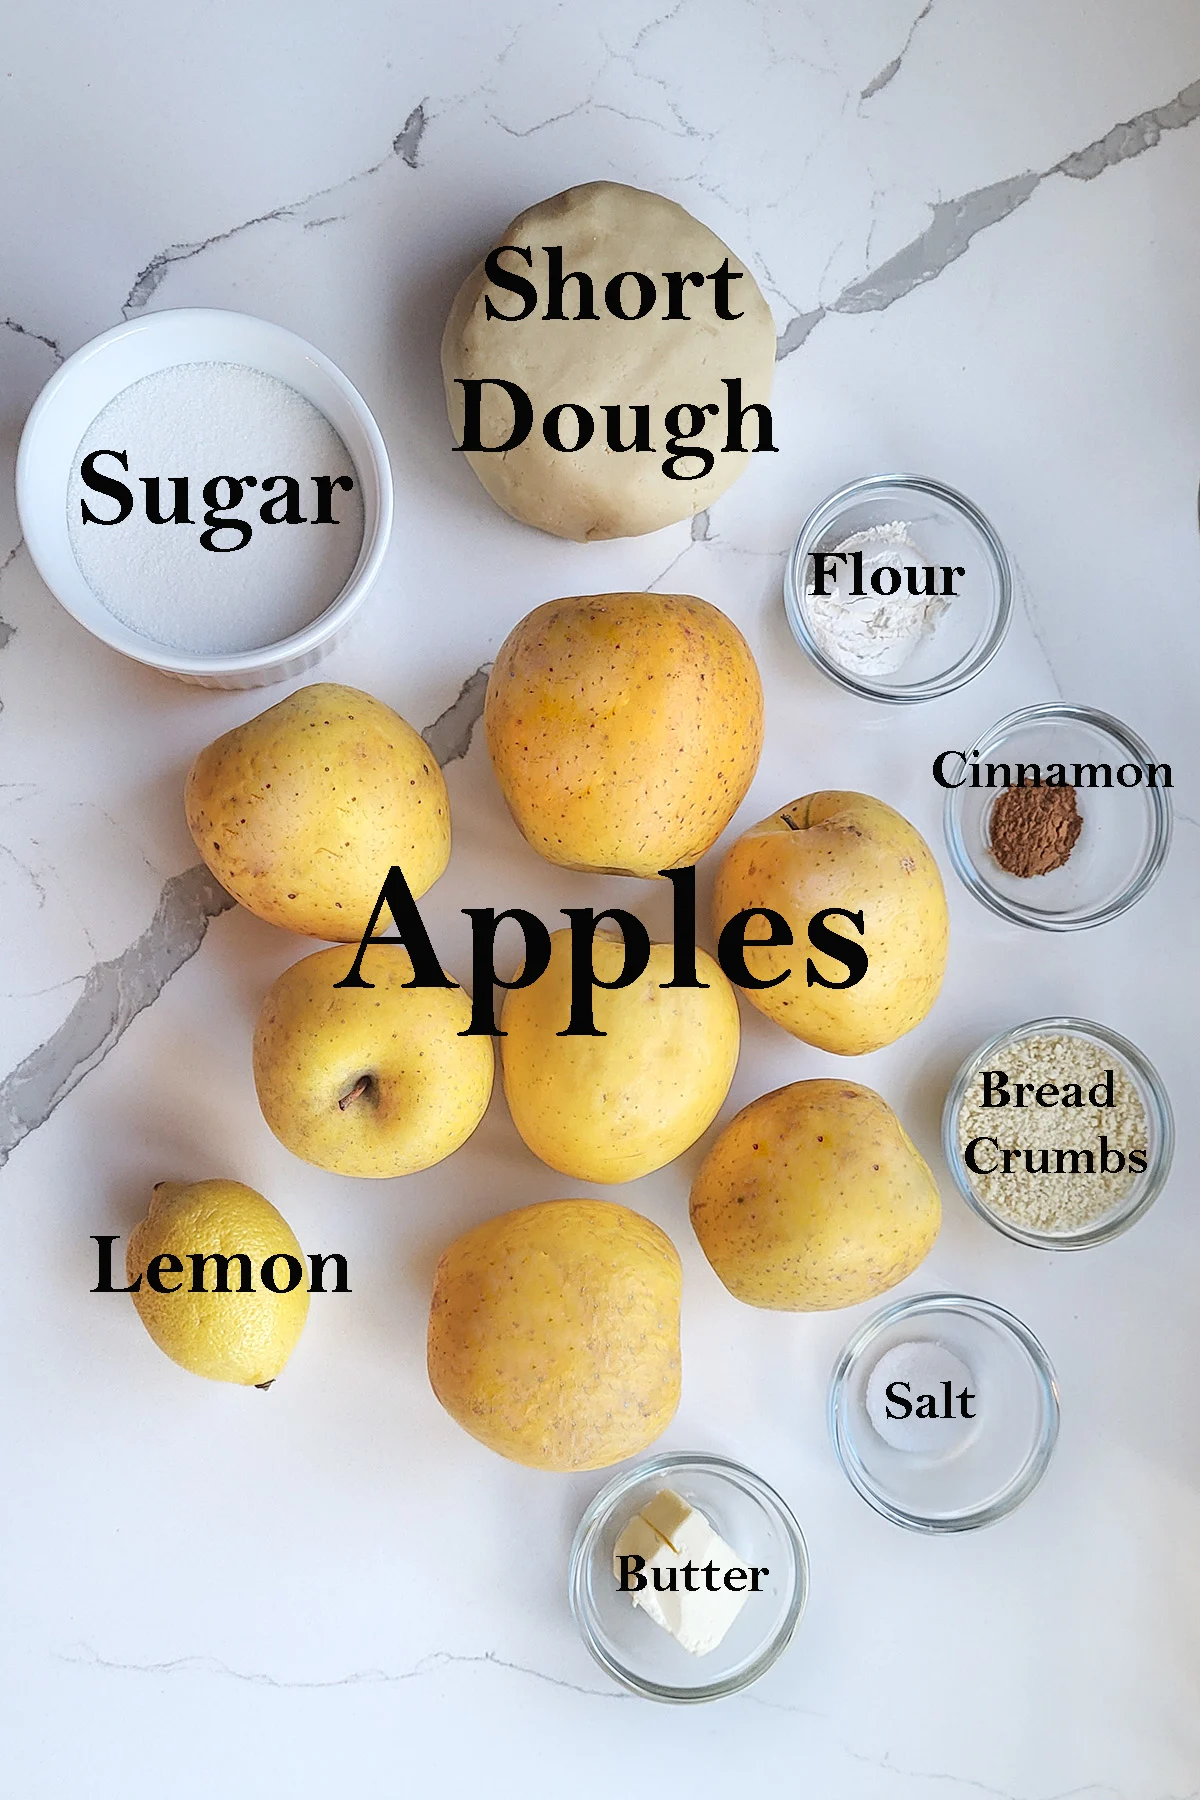 ingredients for making french apple tart on a white surface.